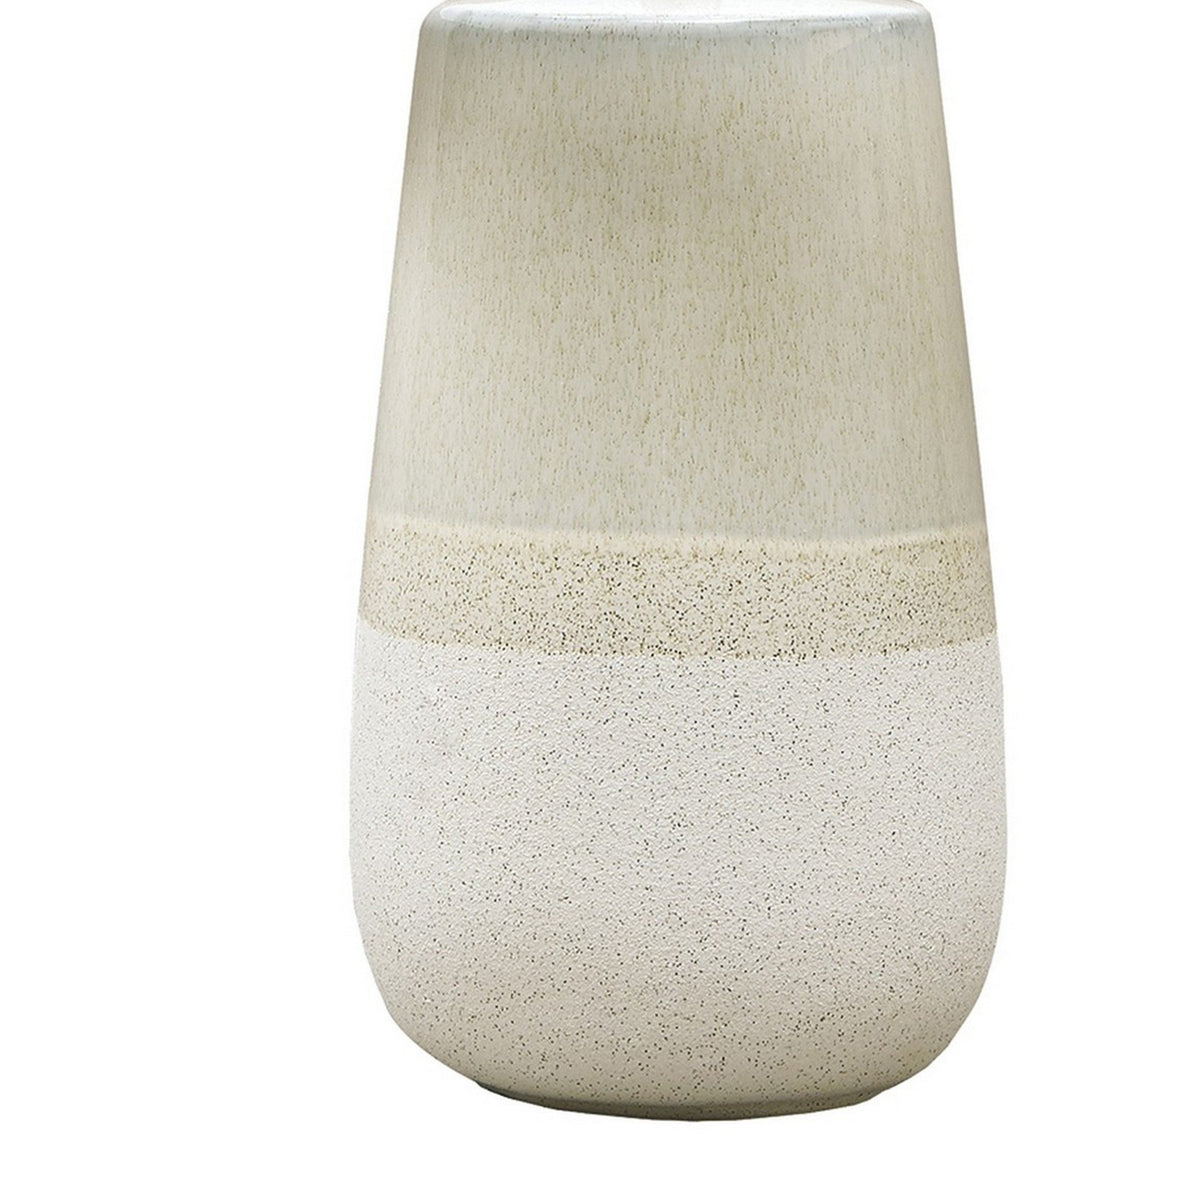 Speckled Ceramic Base Table Lamp with Drum Shade, Beige - BM230969